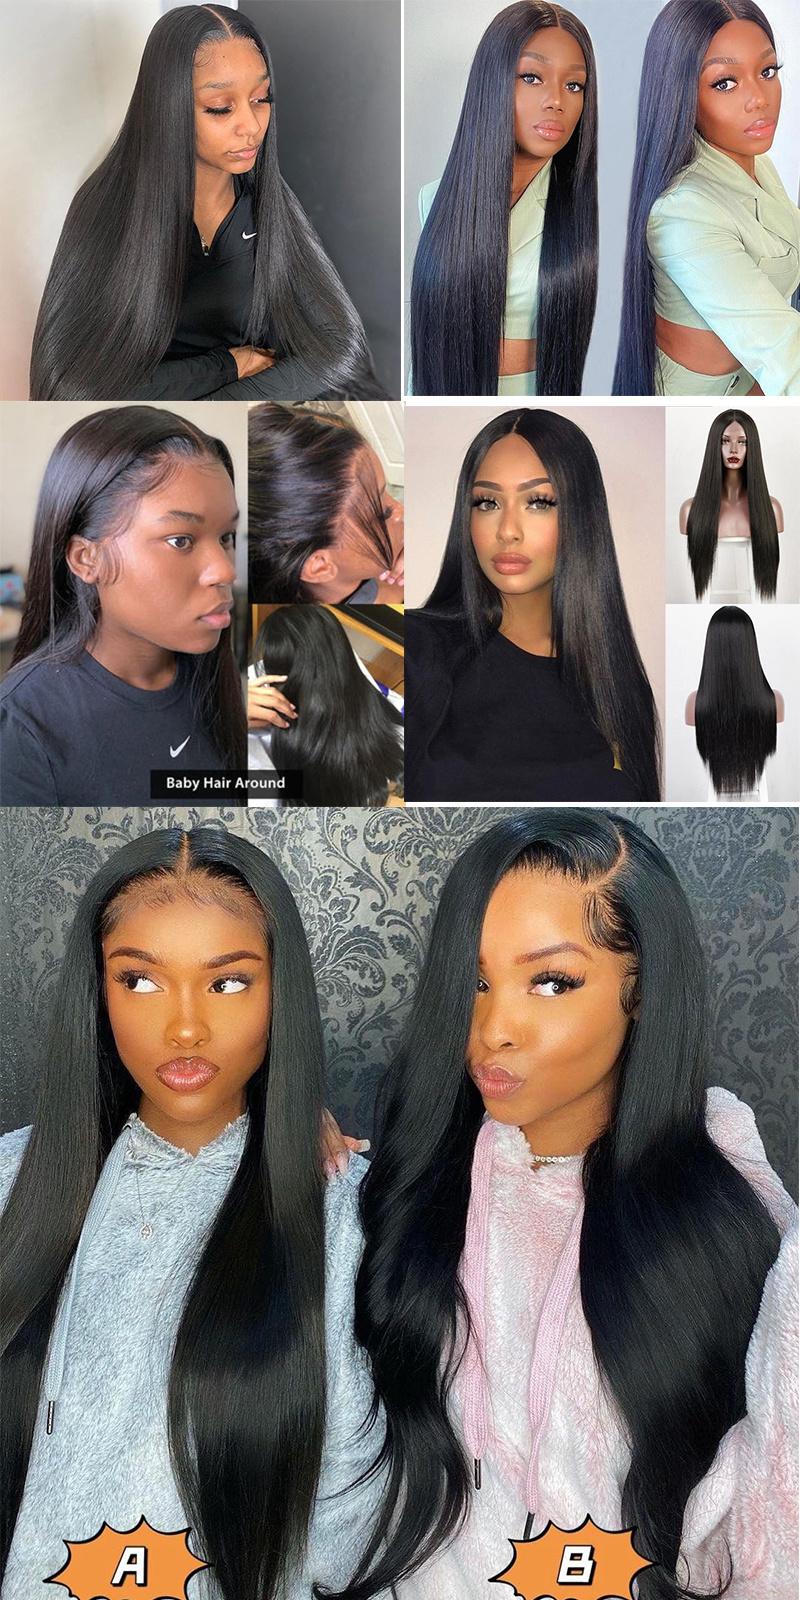 Colored Straight Remy Hair Lace Front Wig Wholesale Human Hair Extension Full Lace Wigs China Toupees Virgin Human Hair Wigs